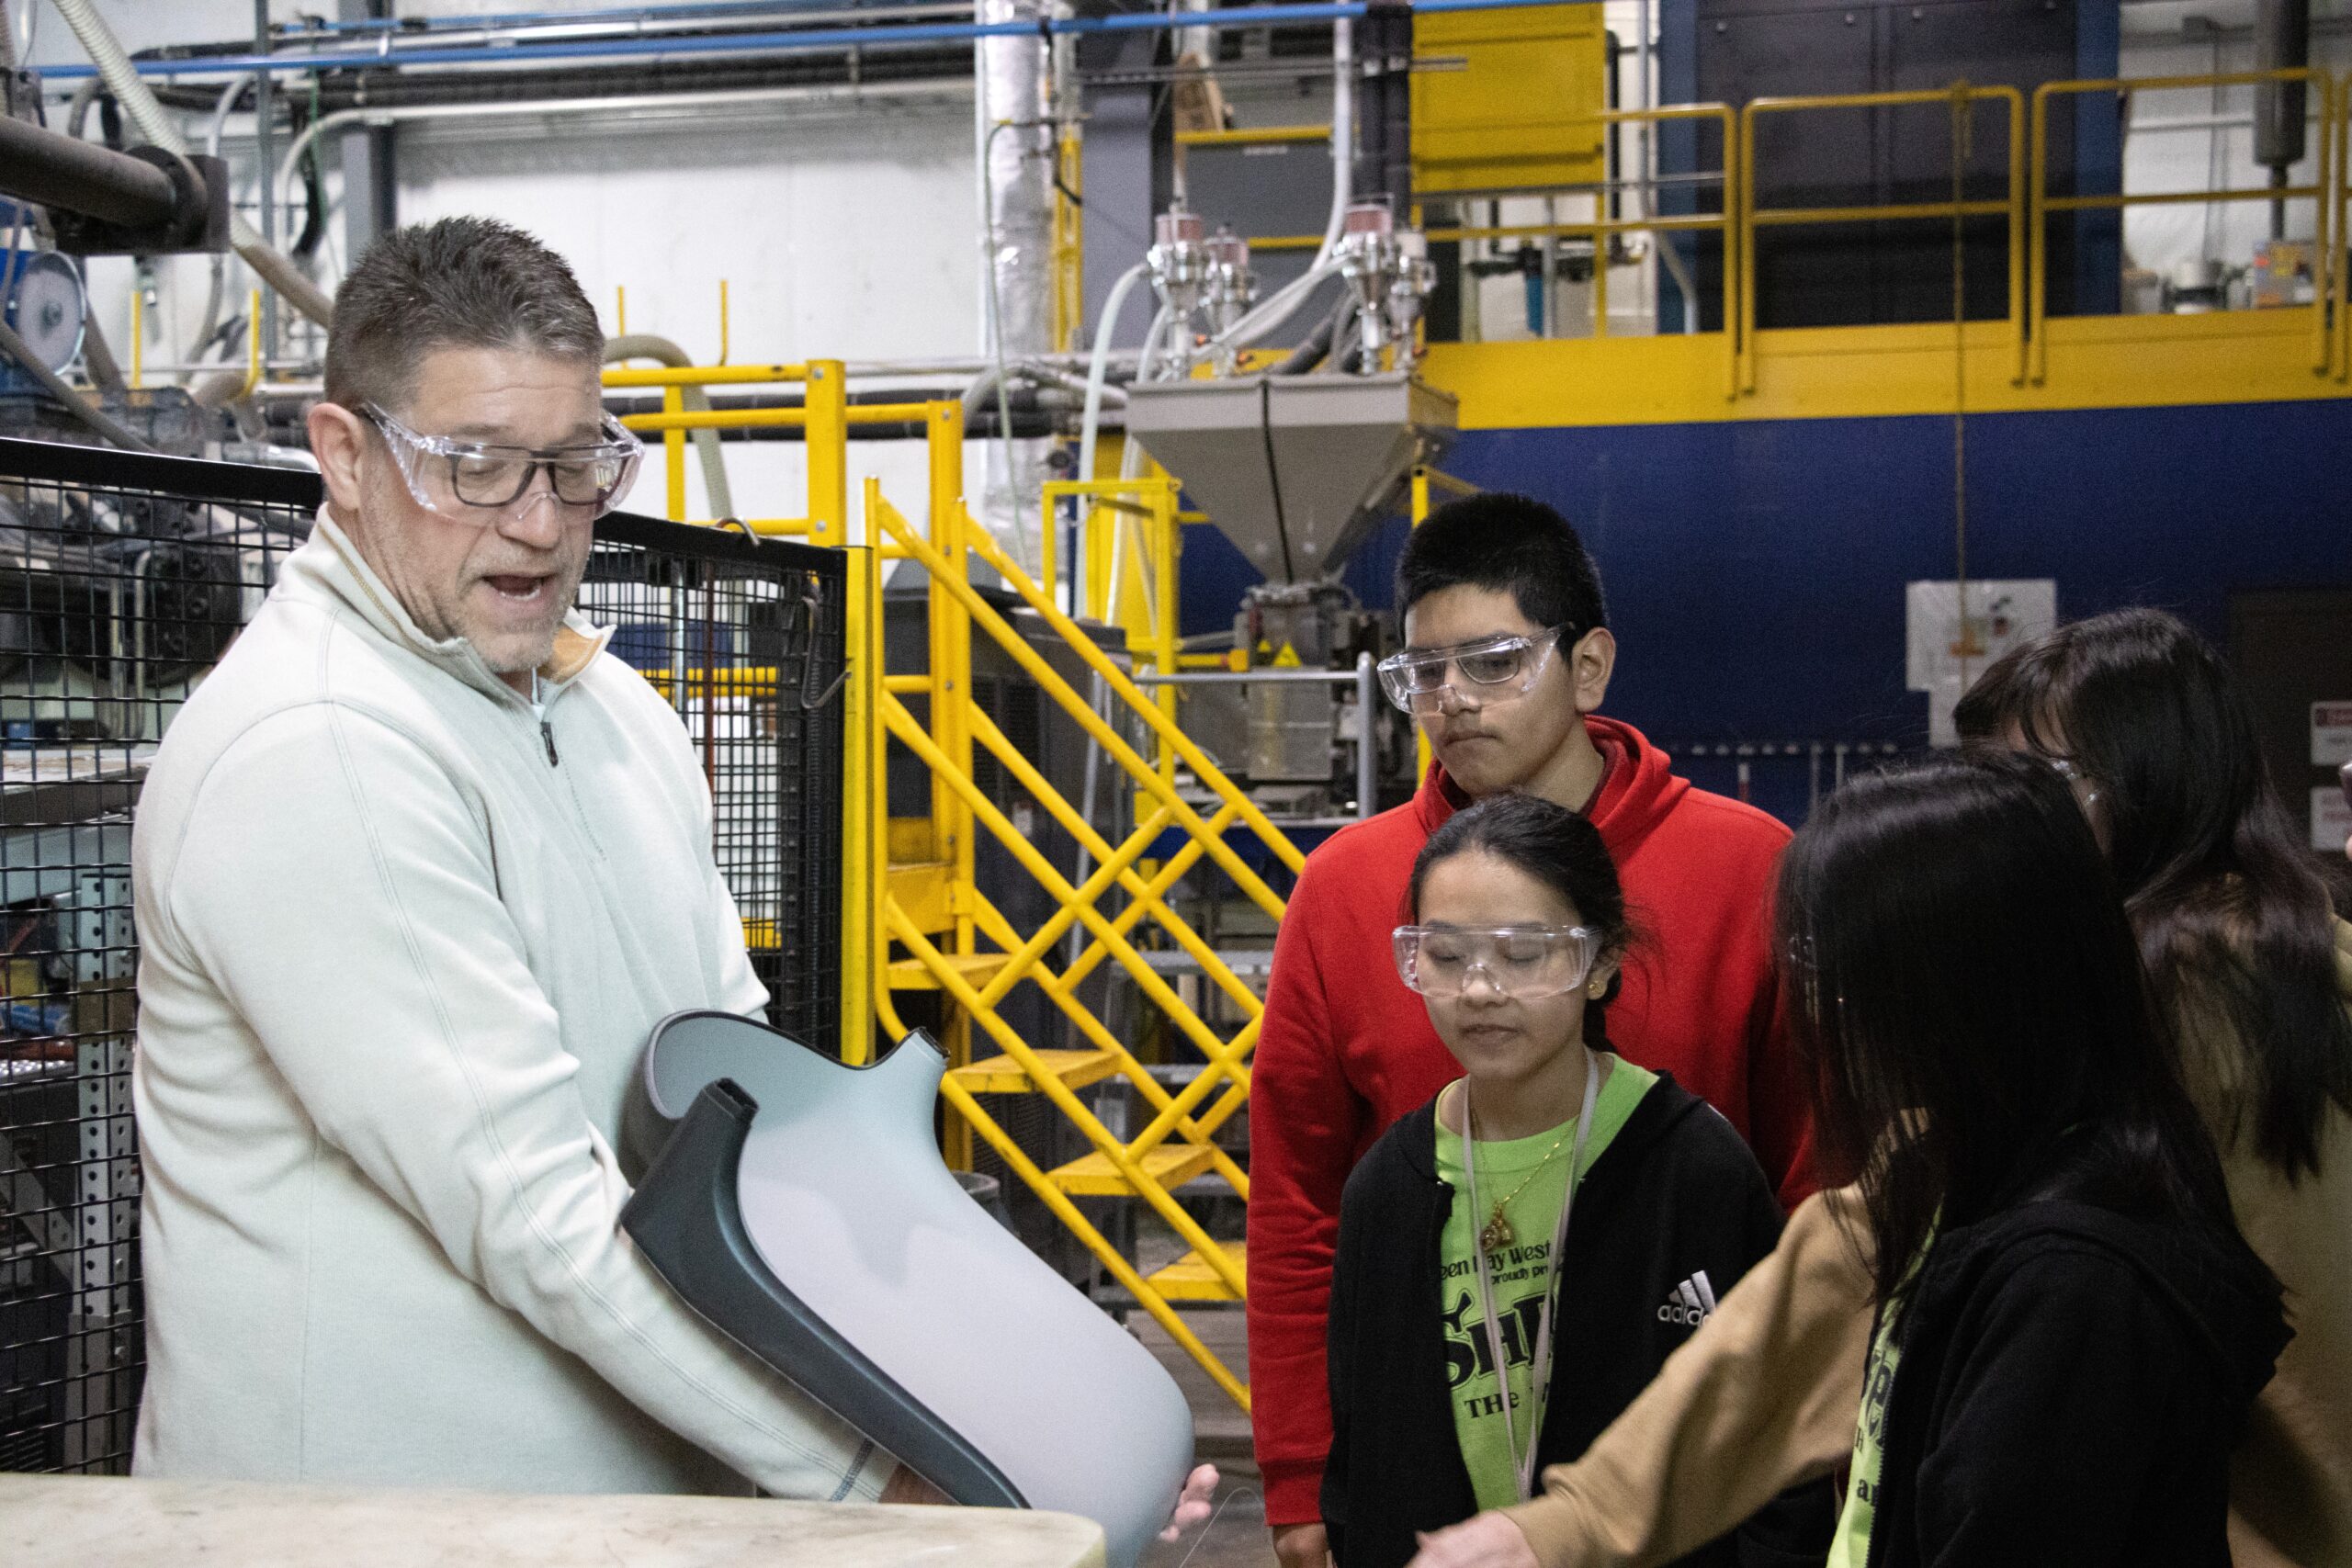 Students learn about manufacturing at tour of KI.